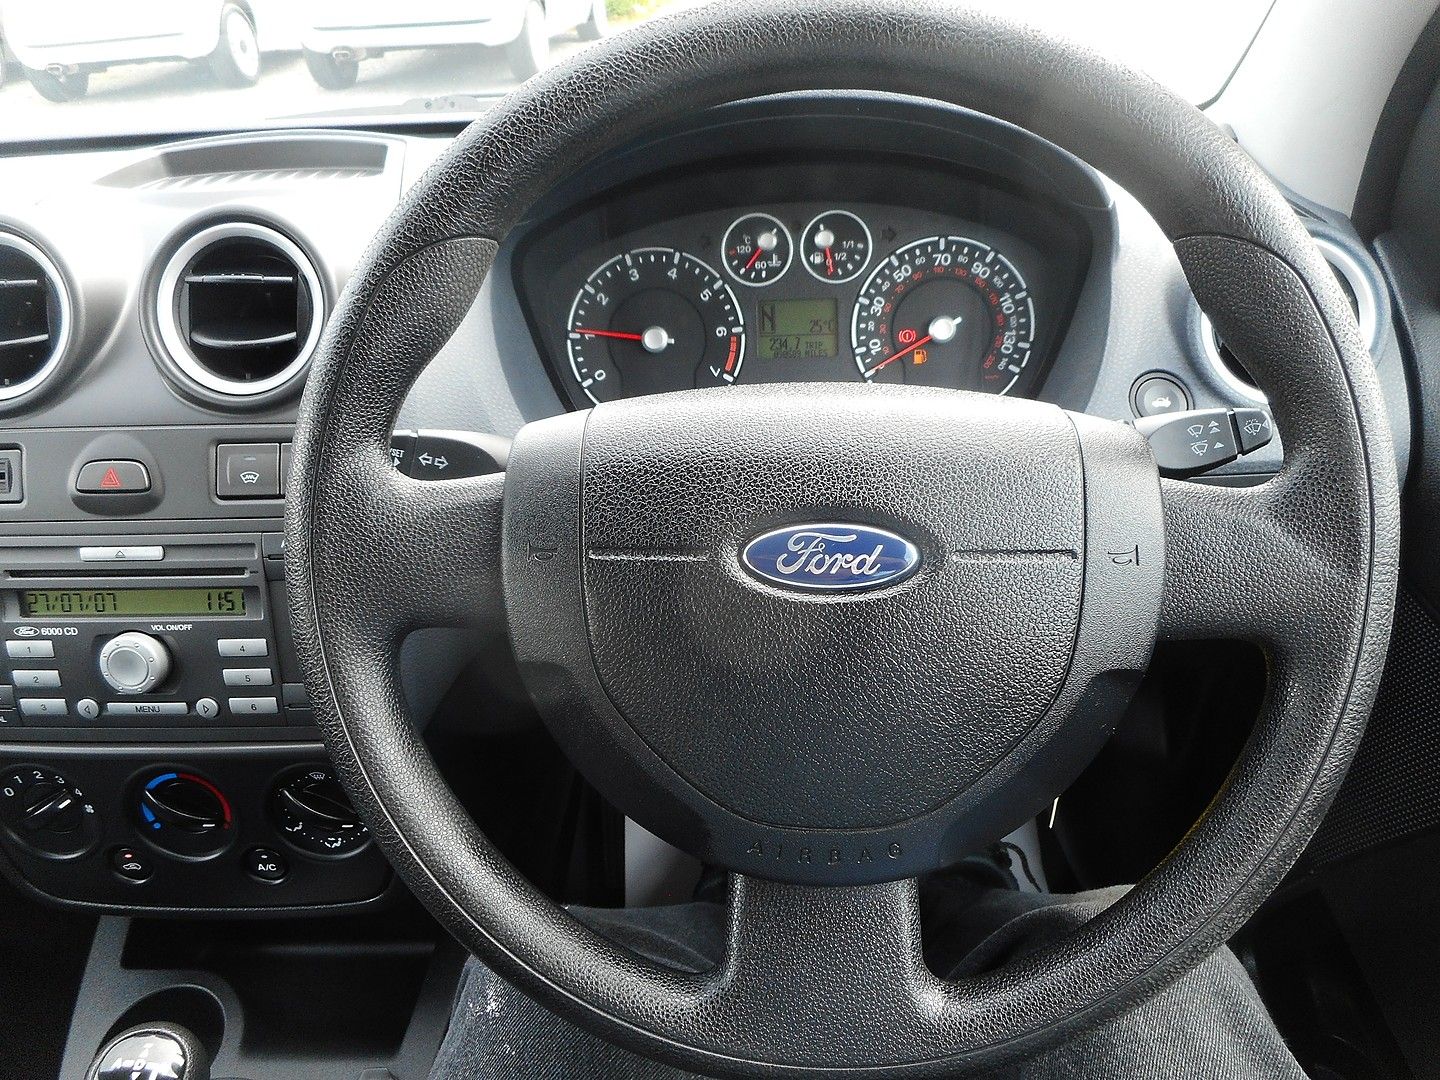 FORD Fiesta Zetec Climate 1.4 automatic (2006) For Sale in